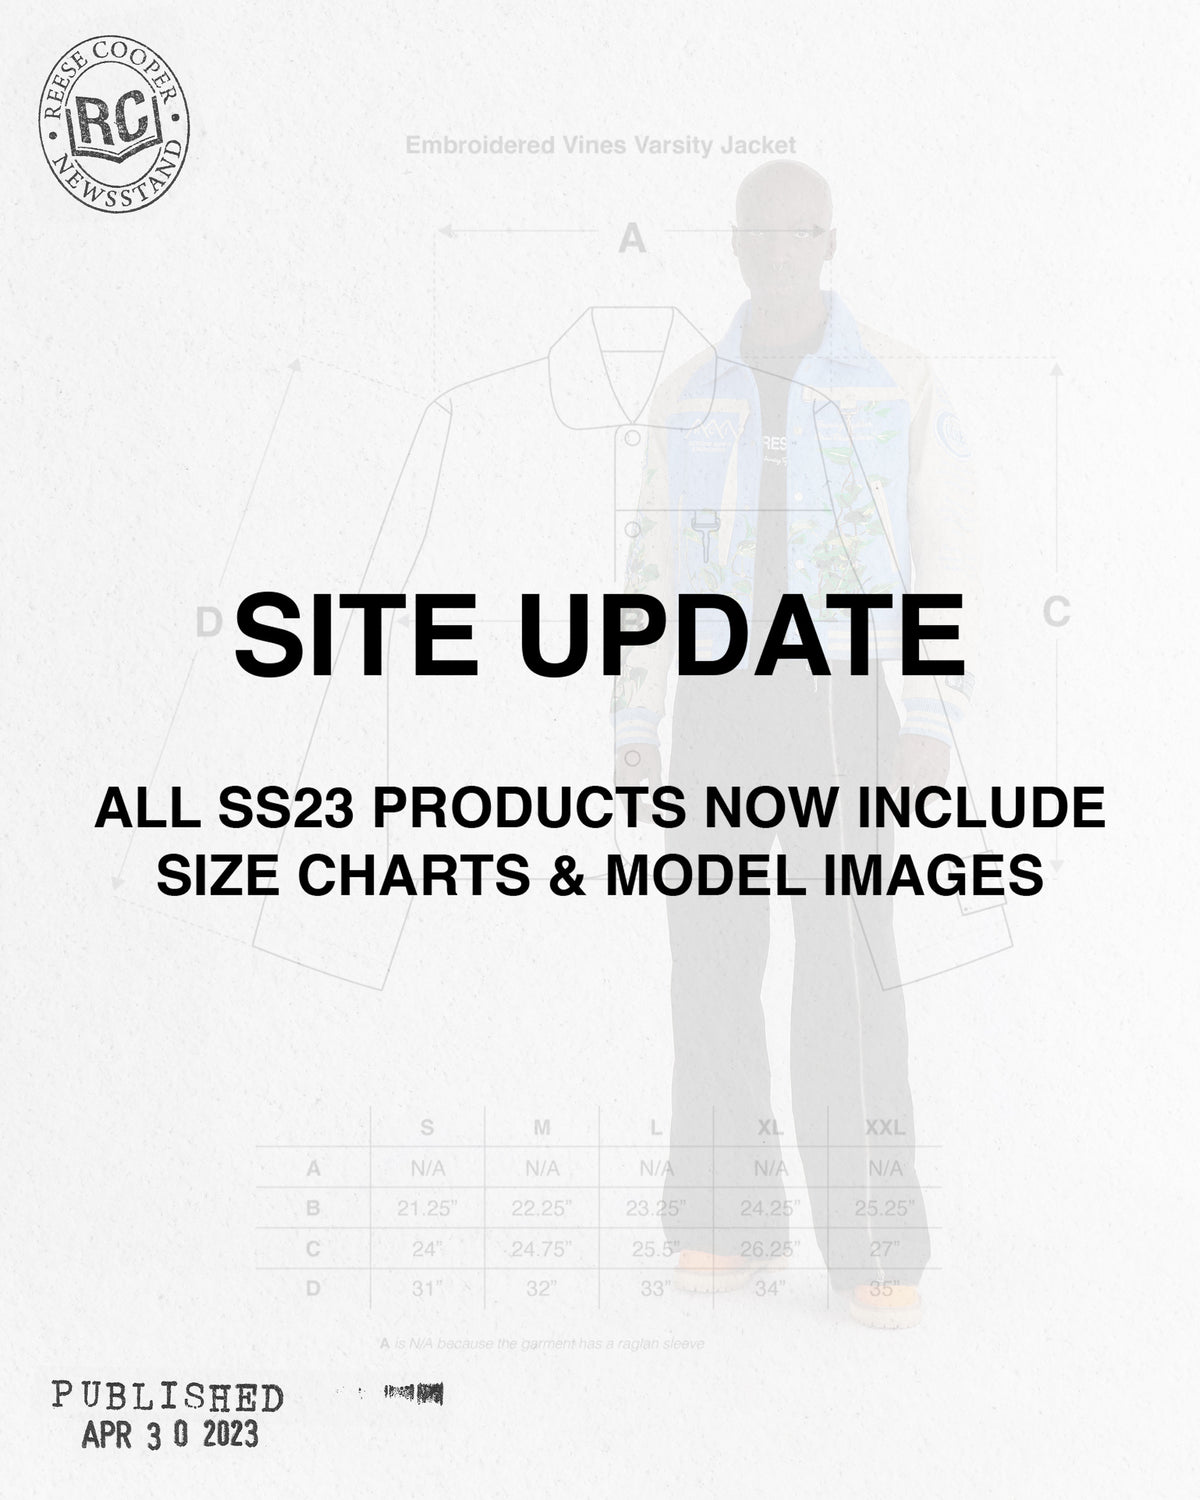 Site Update: Size Charts & Model Images